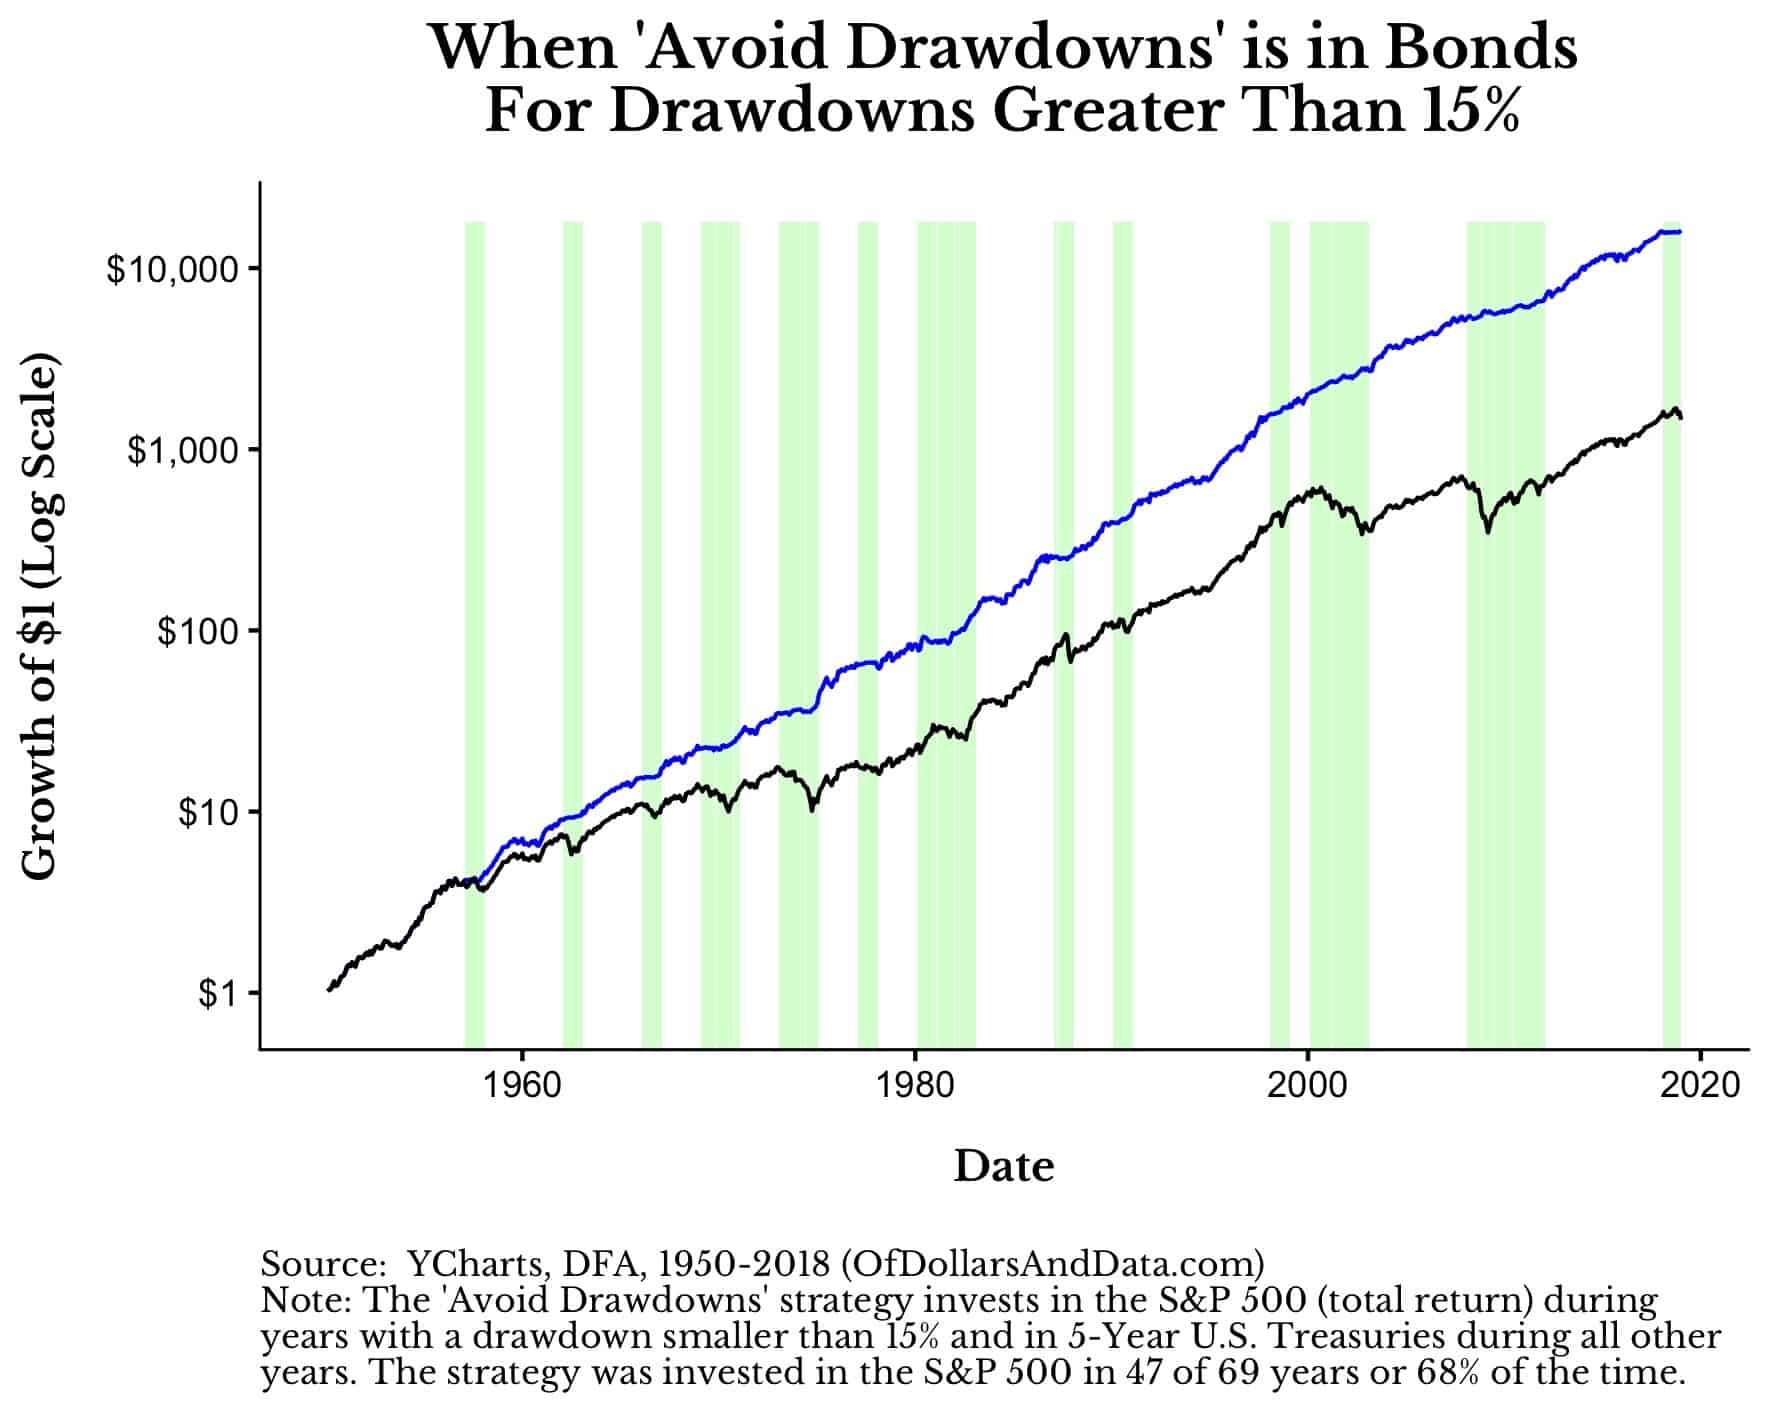 when the drawdown avoidance strategy for 15 percent drawdowns or greater is in bonds